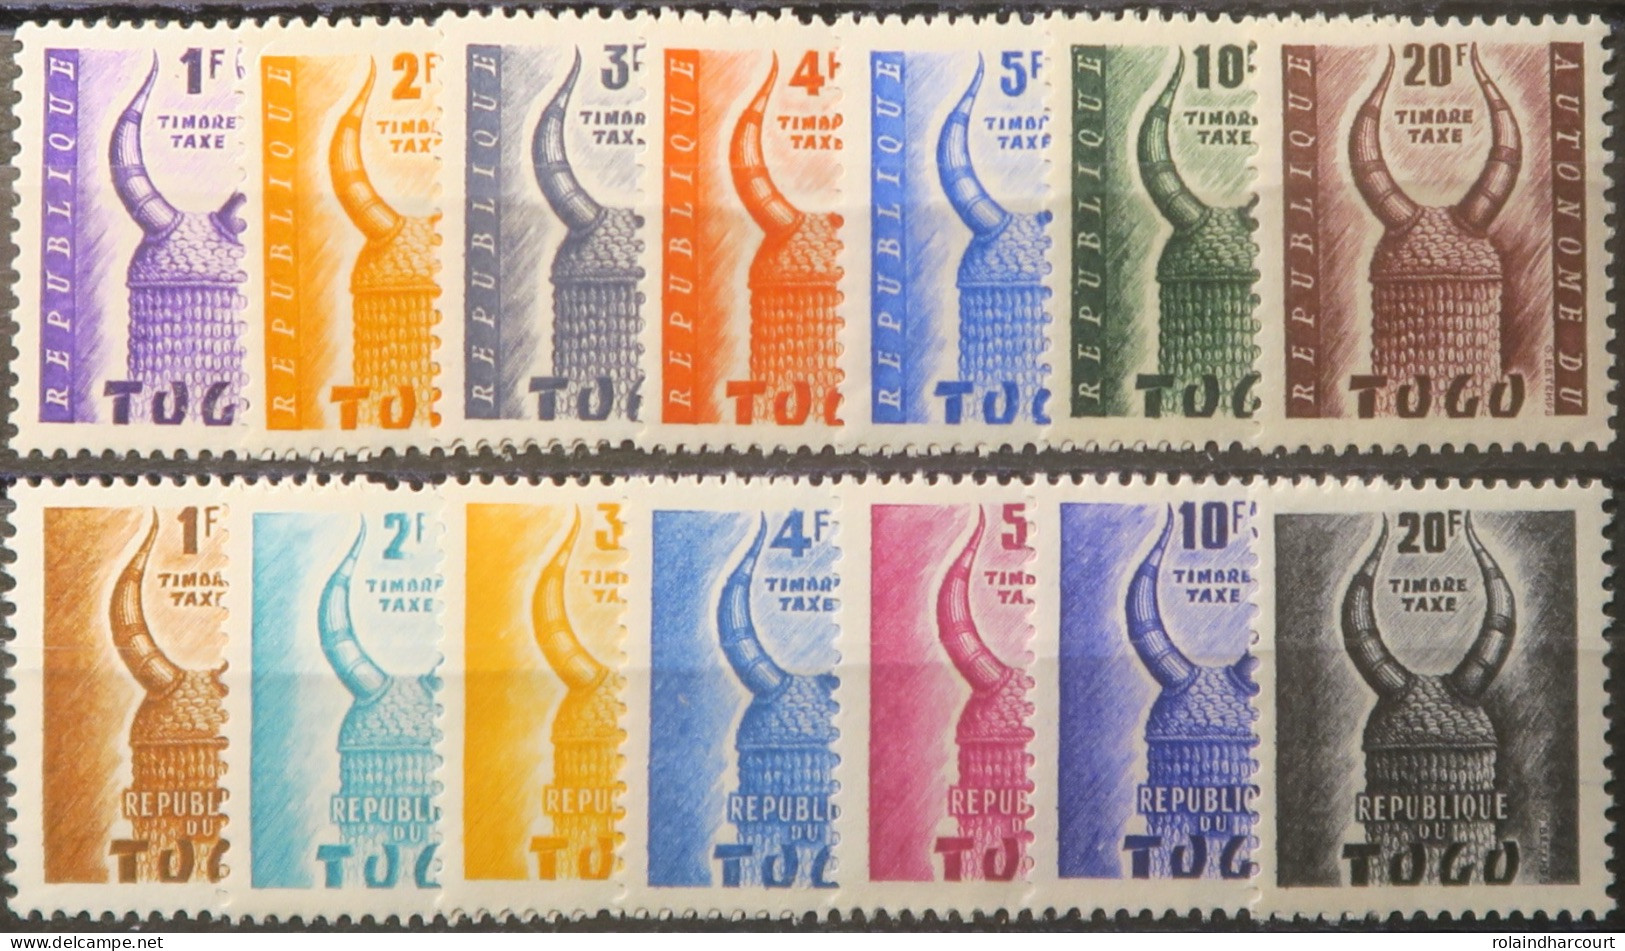 R2253/839 - TOGO - 1957 - TIMBRES TAXE - SERIES COMPLETES - N°48 à 61 NEUFS* - Togo (1960-...)